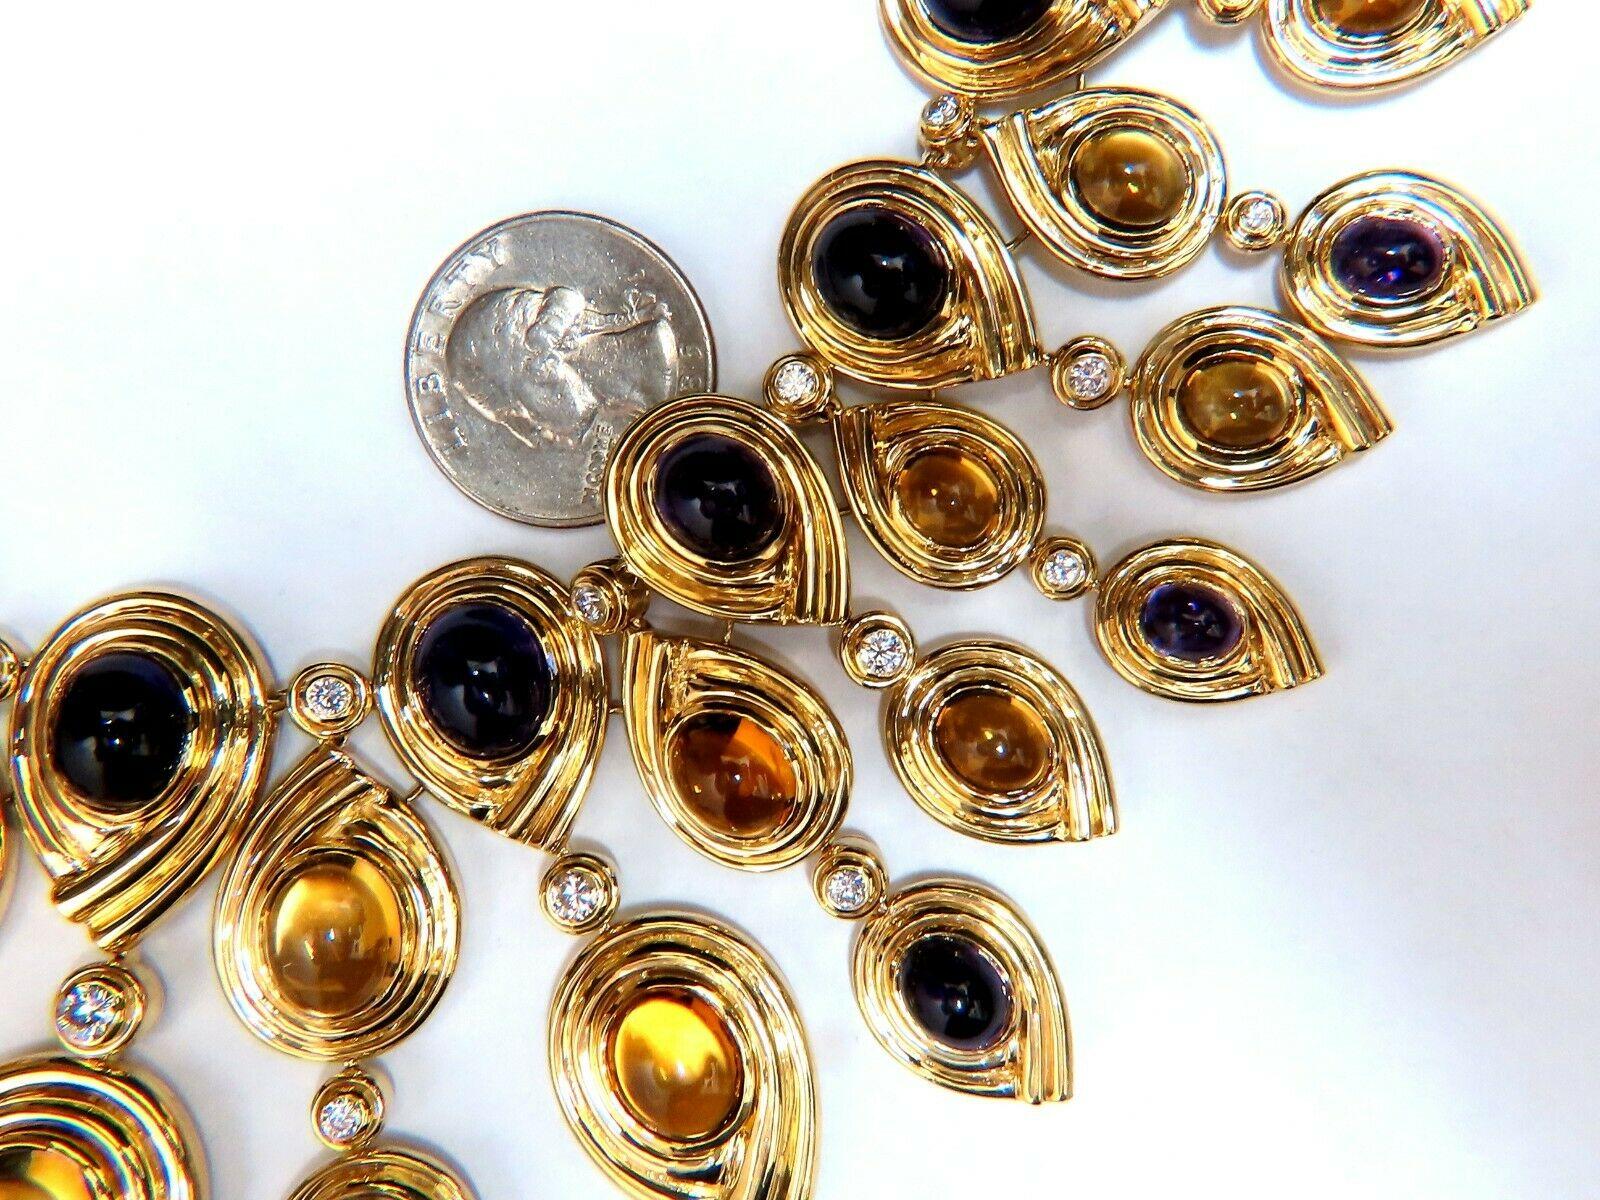 126ct. Natural Amethyst Citrine Necklace Earrings Suite

Cabochon Cut Purple Amethyst & Yellow Citrines

Clean clarity & Transparent

Ranging 12x10-3x5mm

6.15ct. Natural round diamonds,

Full cut, brilliant

Vs-2 clarity F/G-color.

Necklace